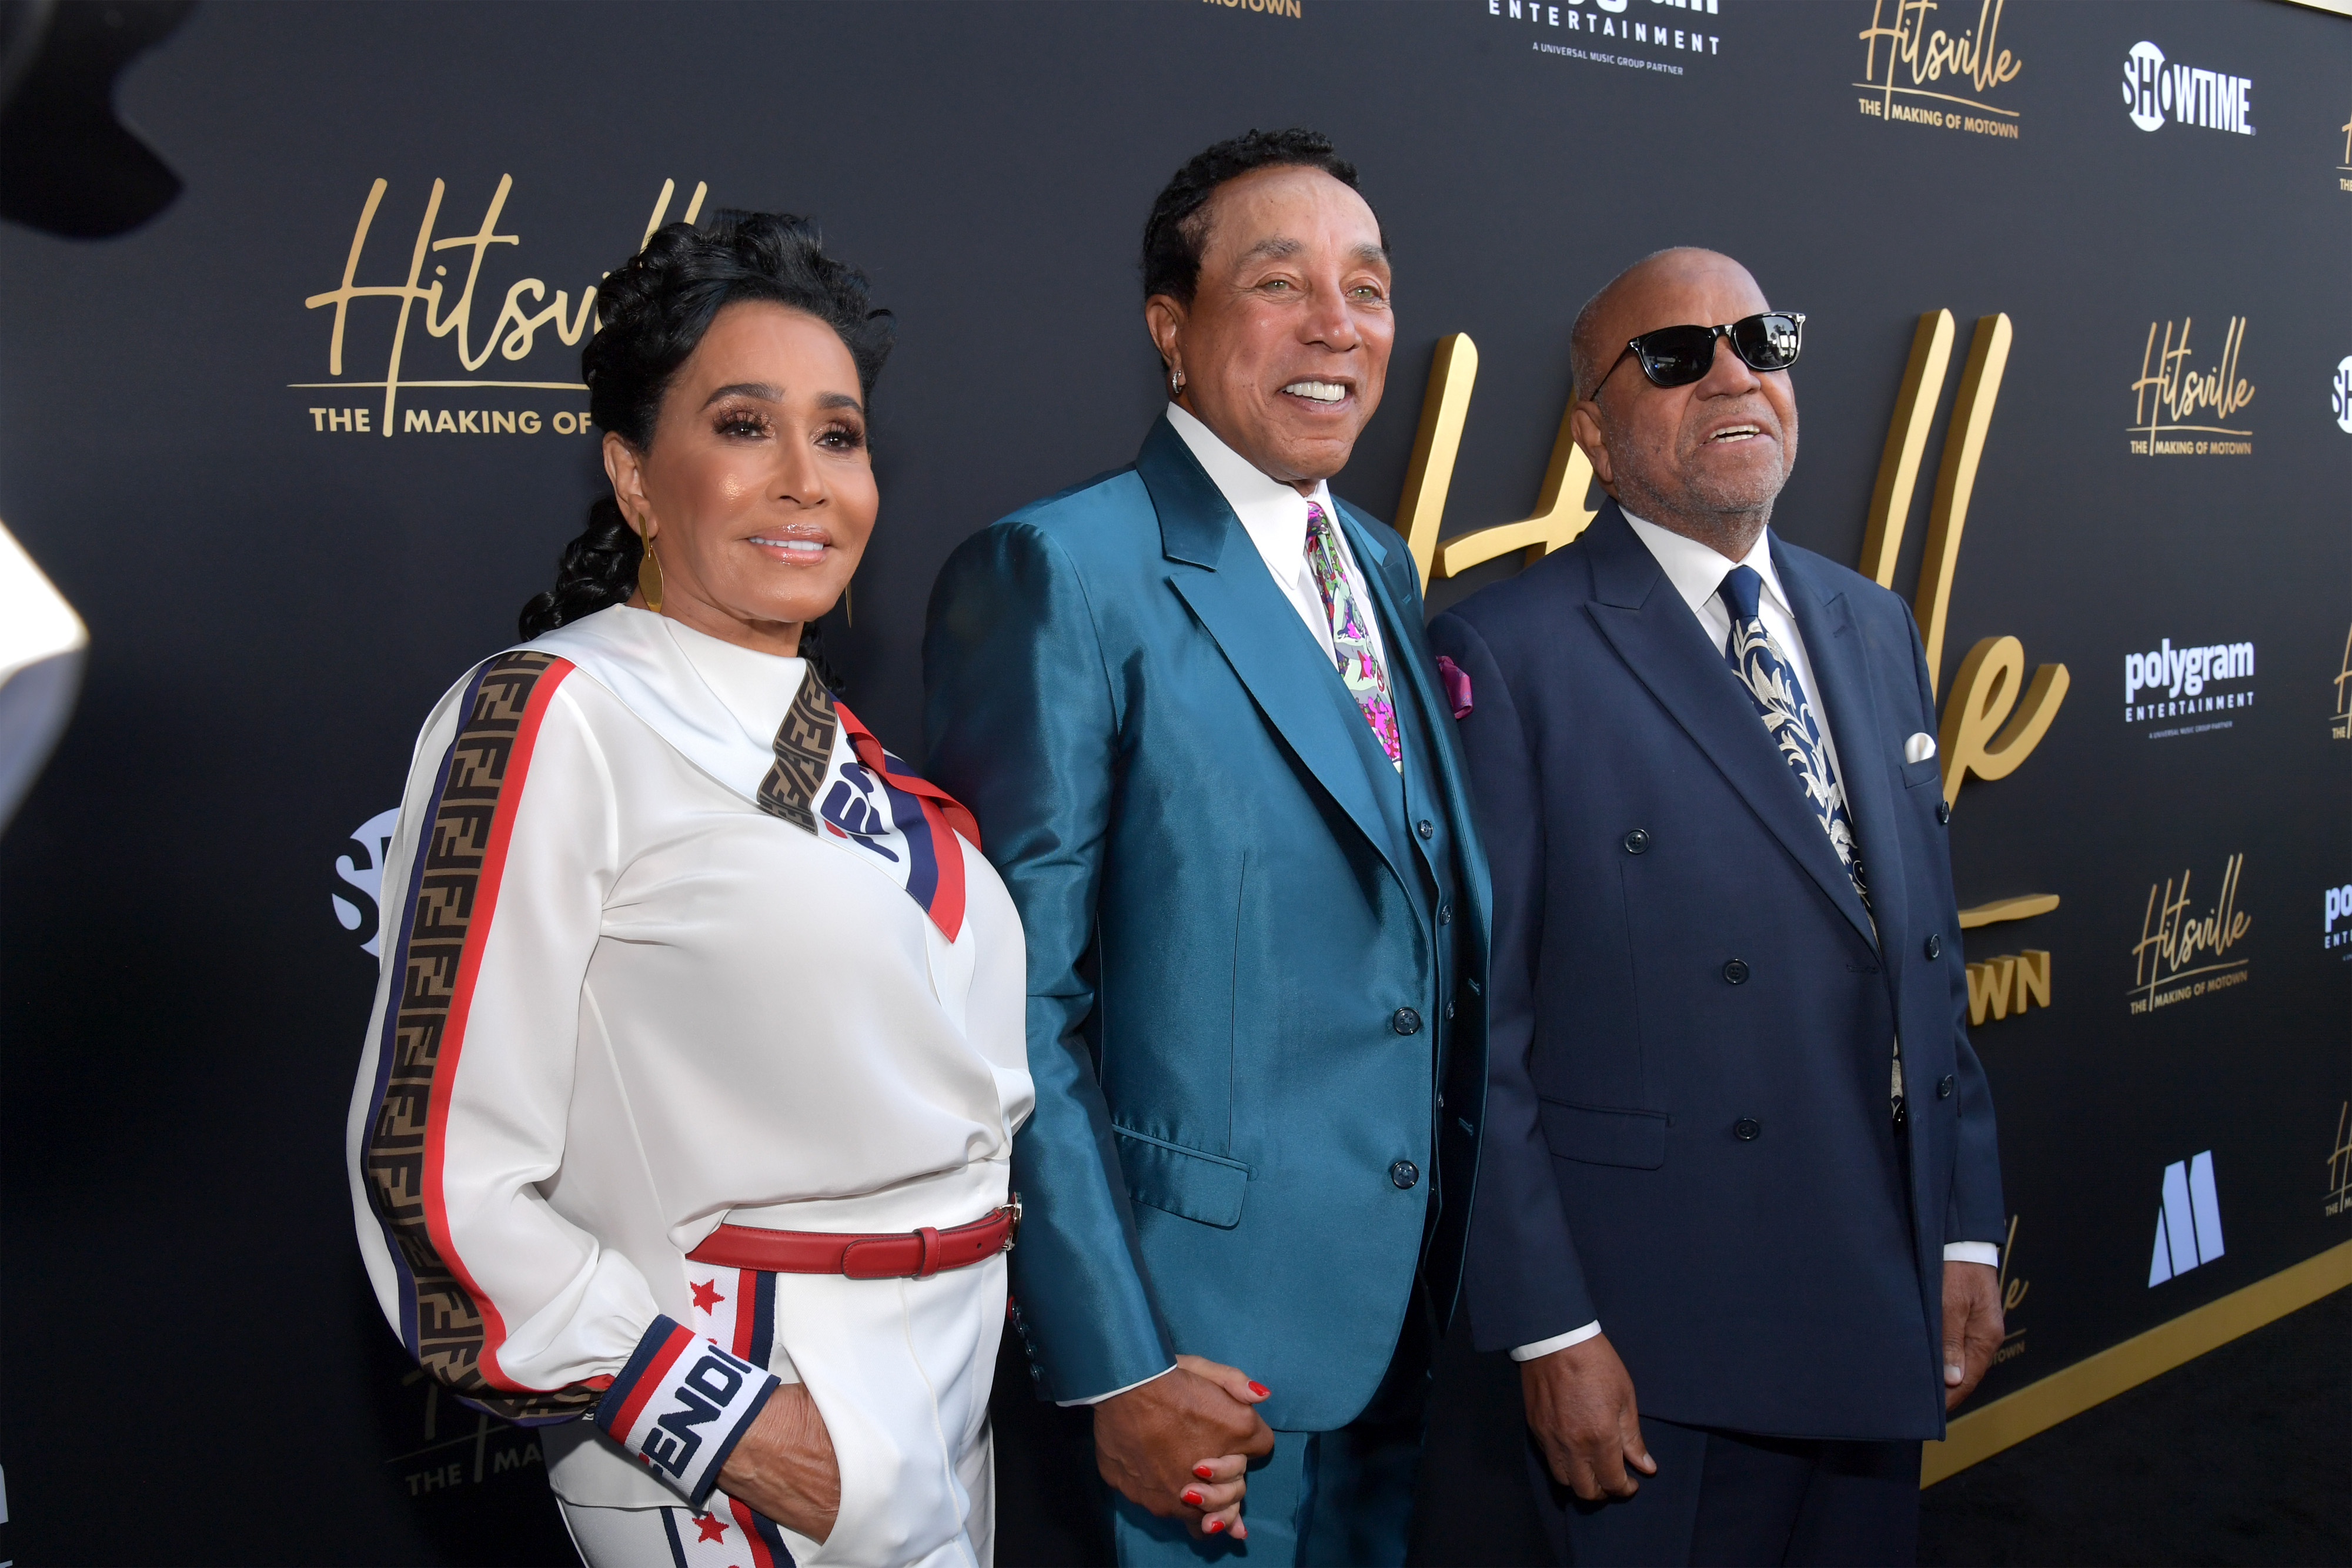 Frances Glandney, Smokey Robinson, and Berry Gordy attend the world premiere of Showtime's "HITSVILLE: The MAKING OF MOTOWN" at Harmony Gold Theatre, on August 8, 2019, in Los Angeles, California. | Source: Getty Images